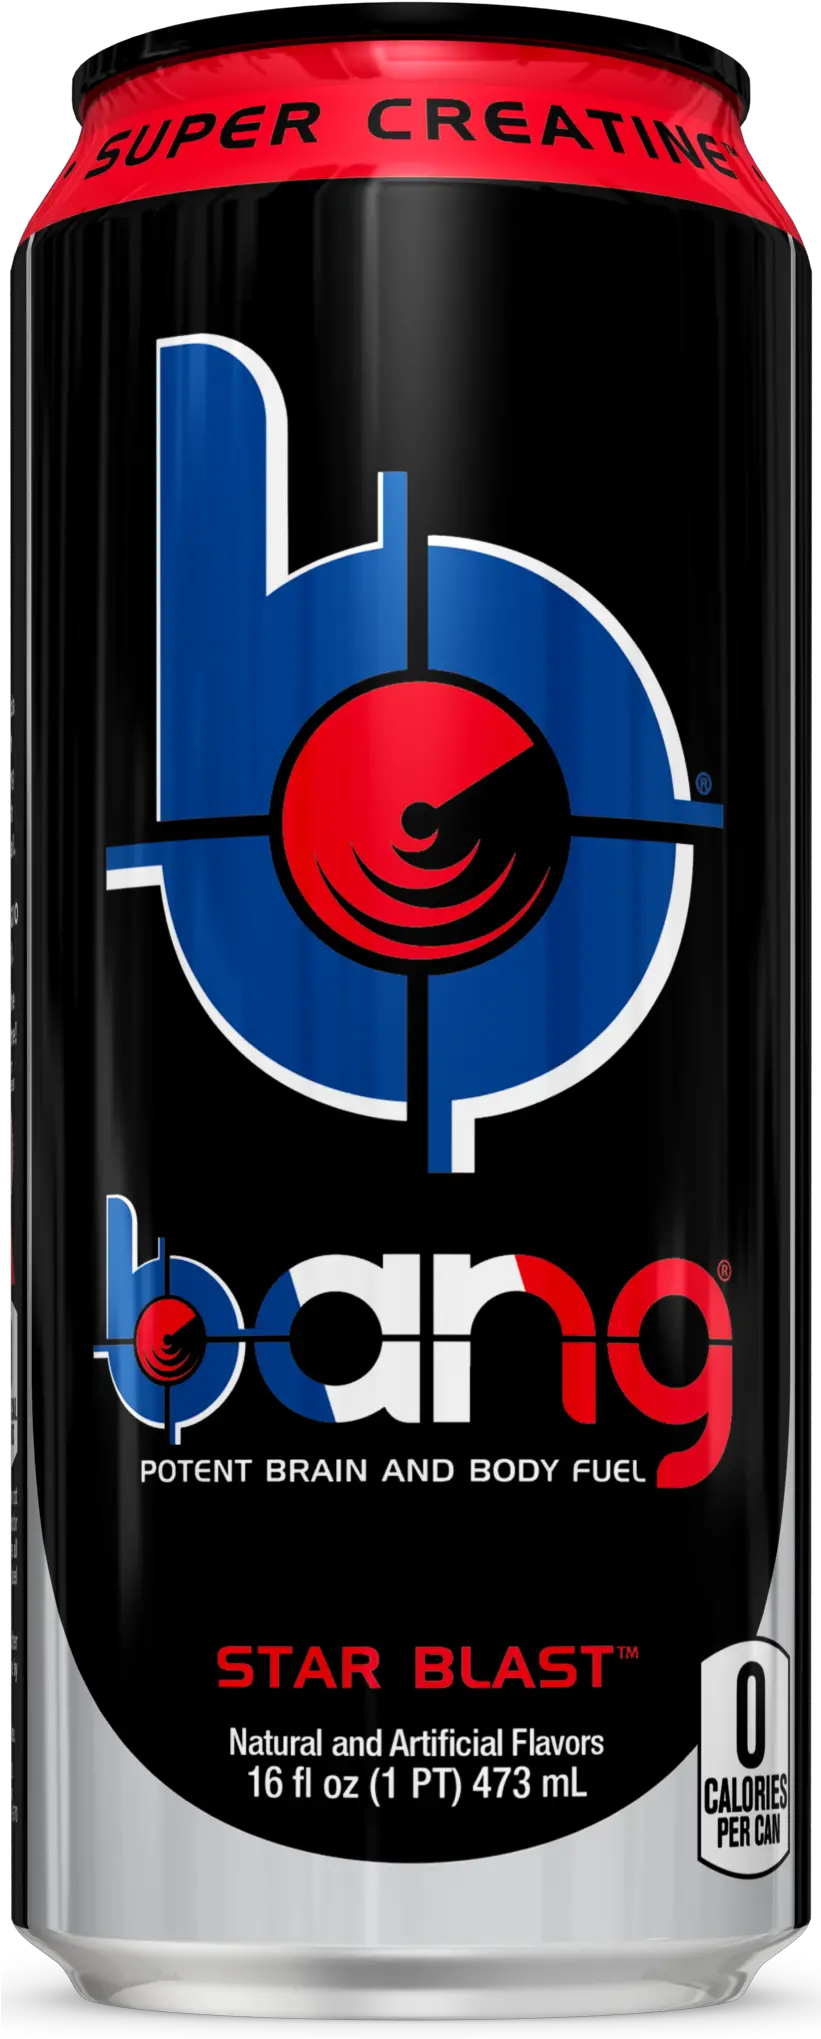 Bang Weinstein Beverage Company Png